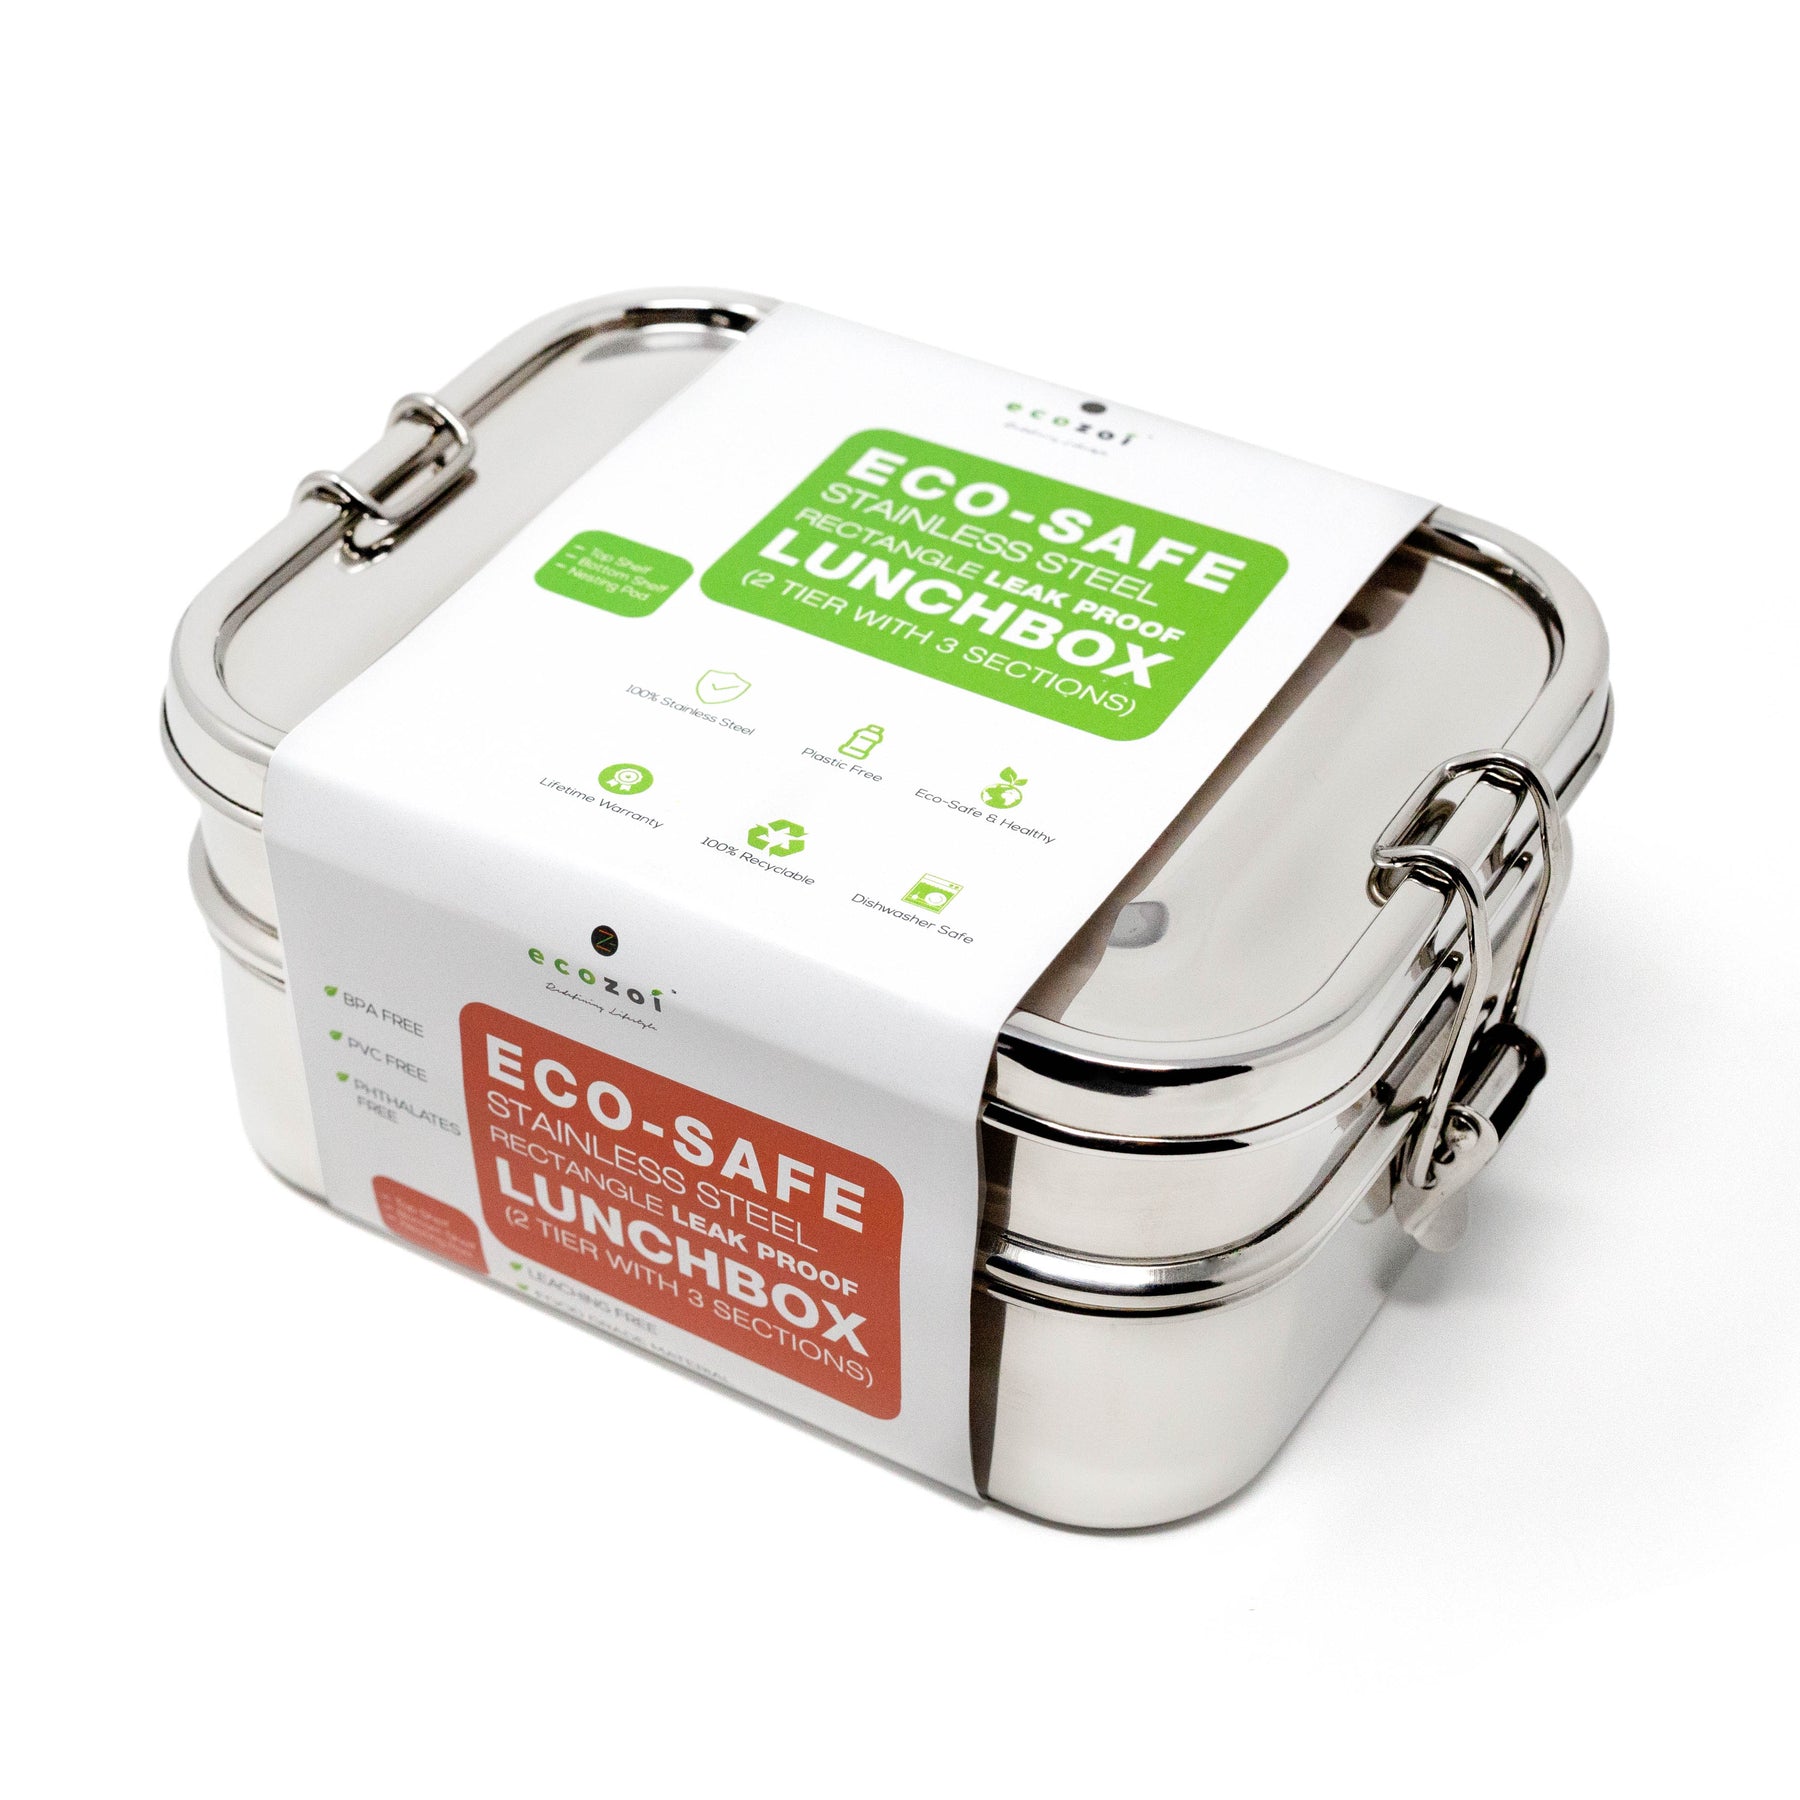 Stainless Steel Lunch Box, 3 Tier Leak Proof, 75 oz by ecozoi